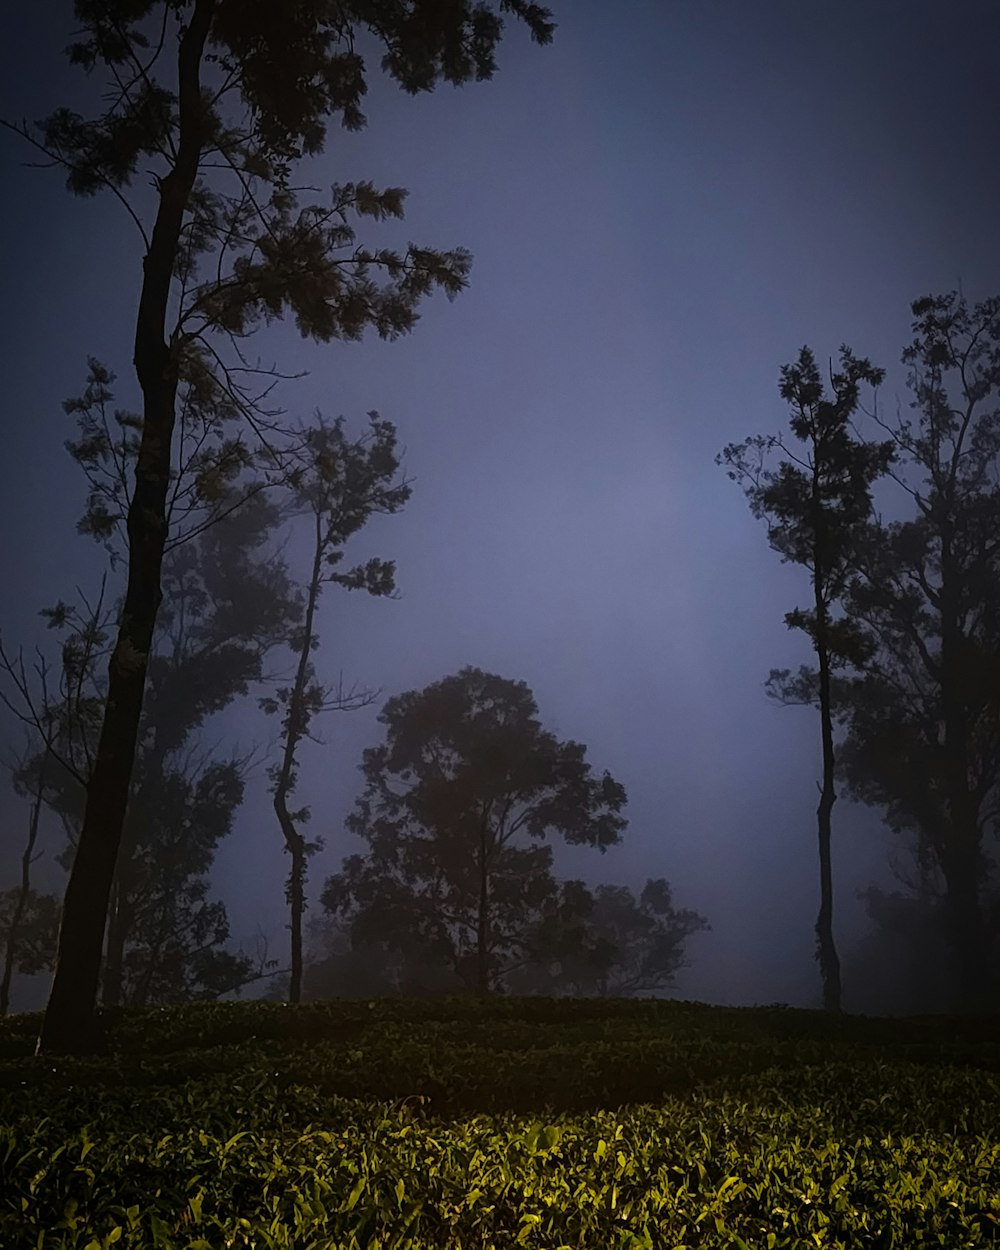 a foggy night with trees and bushes in the foreground